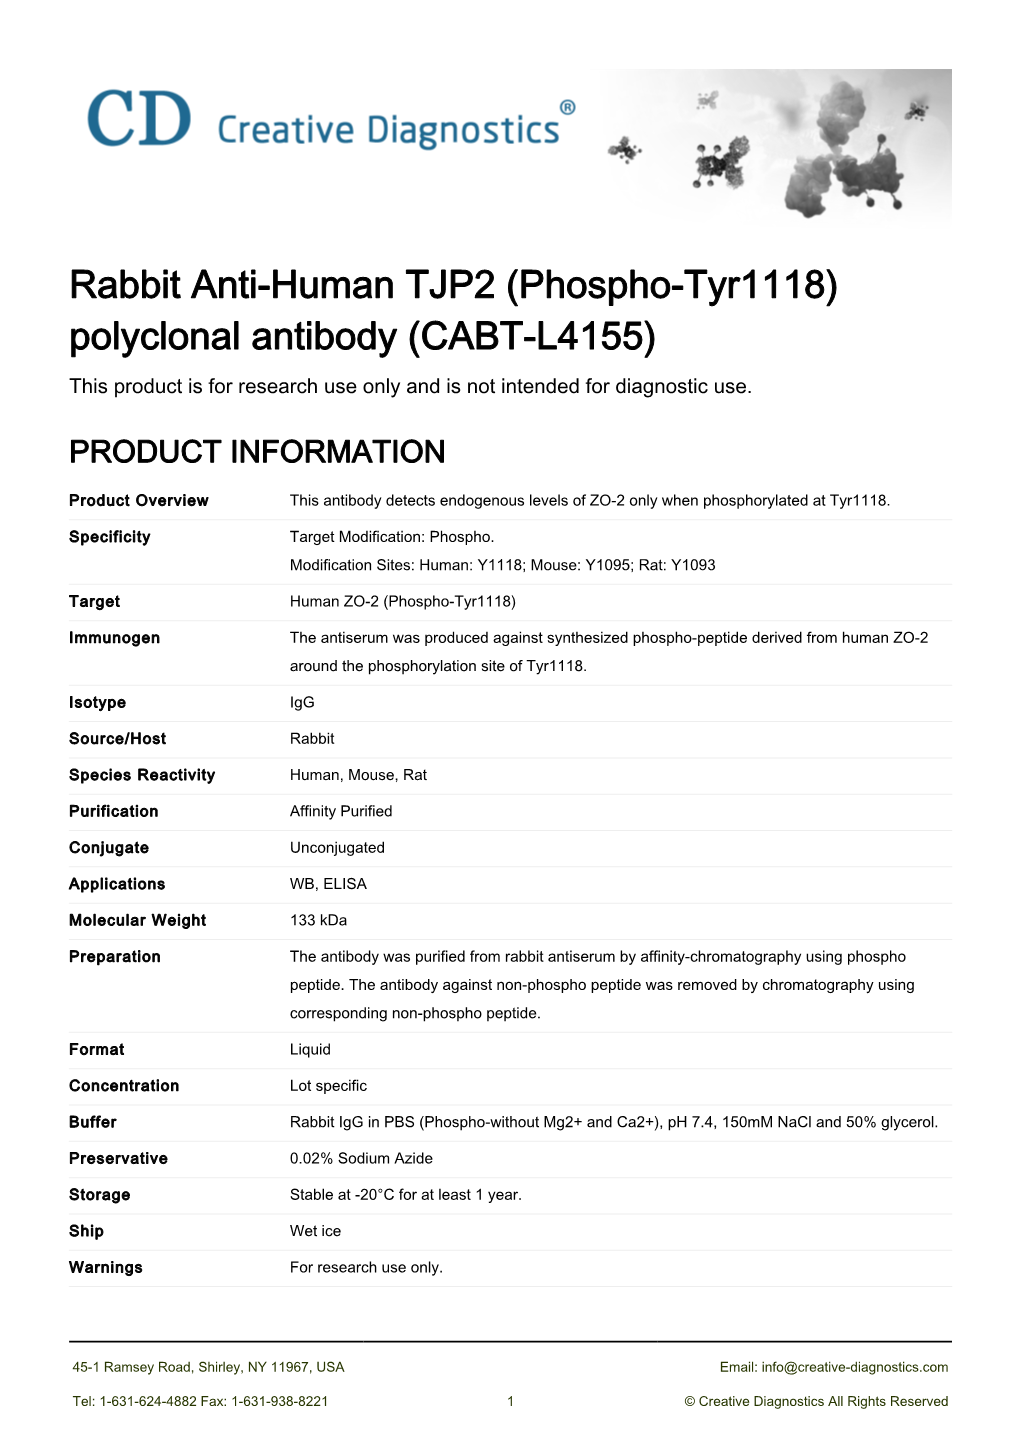 Rabbit Anti-Human TJP2 (Phospho-Tyr1118) Polyclonal Antibody (CABT-L4155) This Product Is for Research Use Only and Is Not Intended for Diagnostic Use